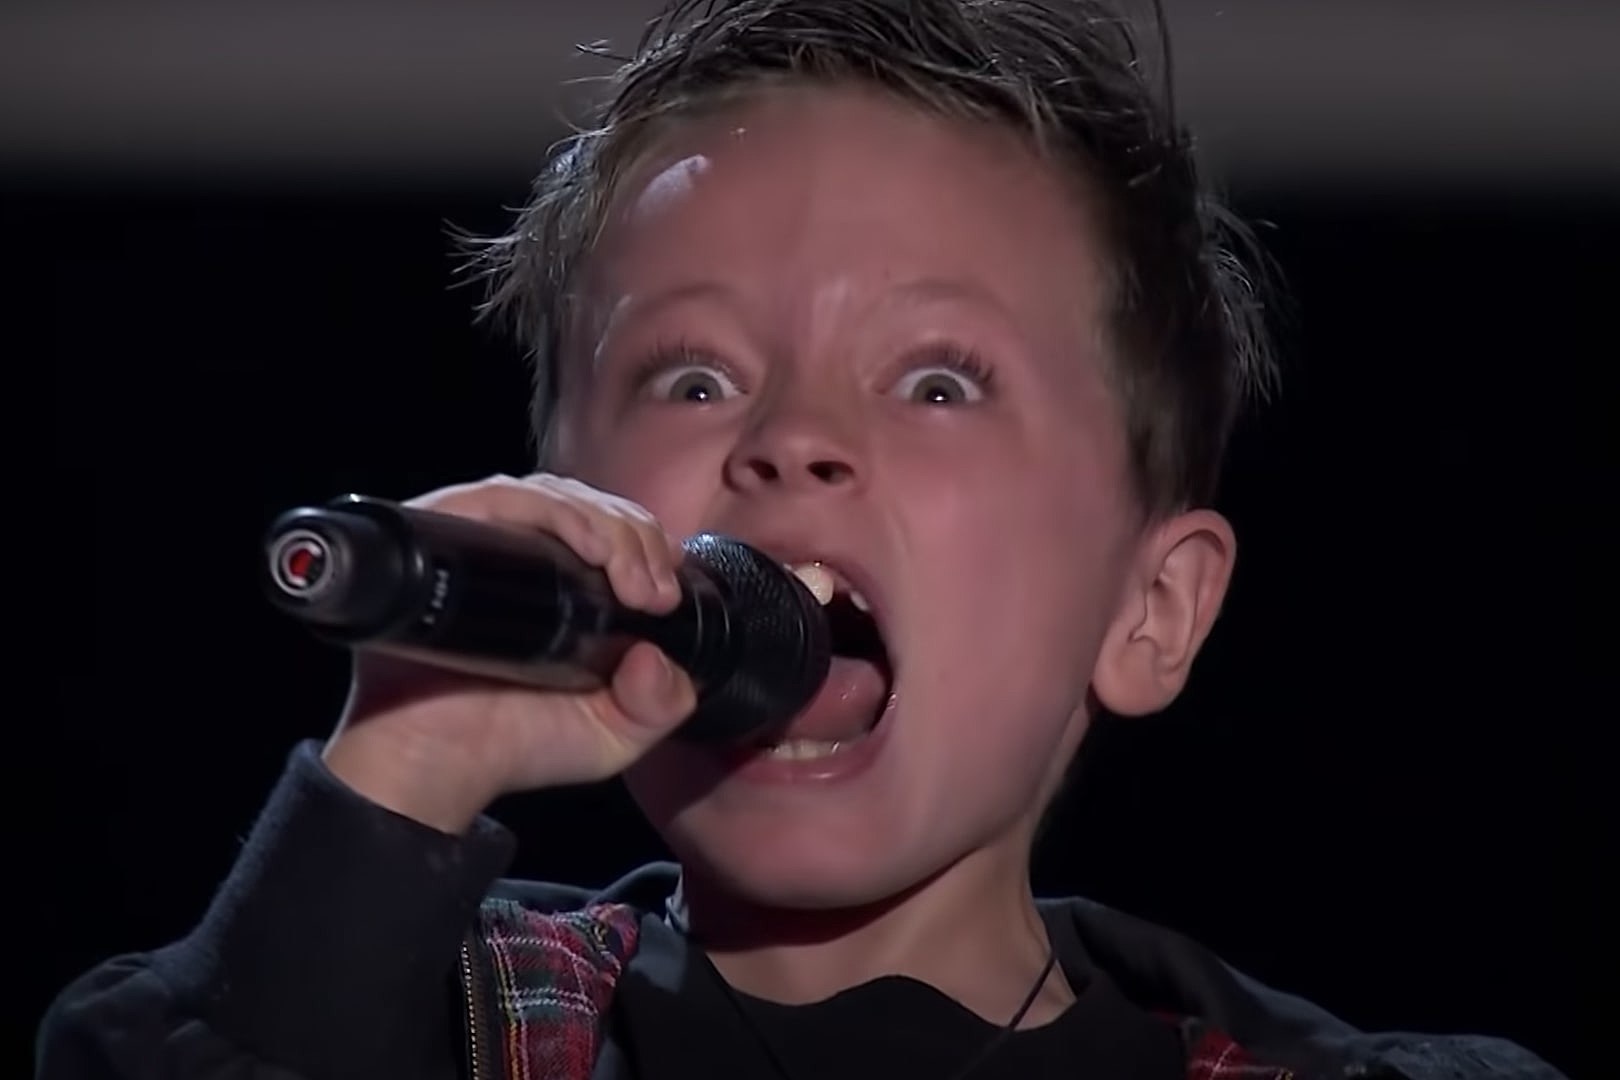 Watch: 7-Year-Old Boy Crushes AC/DC's 'Highway to Hell'